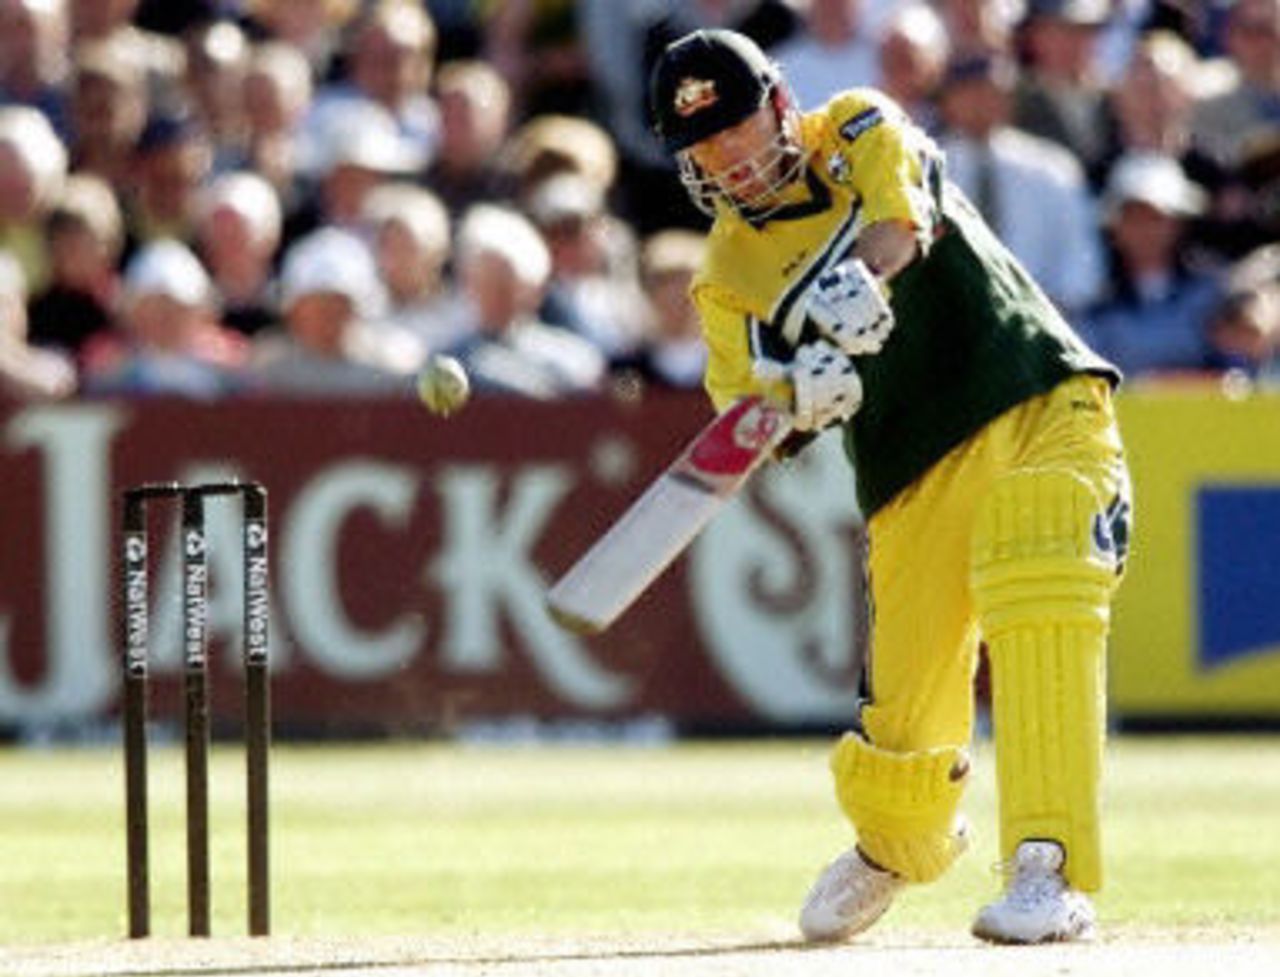 Ian Harvey lofts a ball over mid-off to put Australia within grasp of victory, 3rd ODI at Bristol, 10 June 2001.